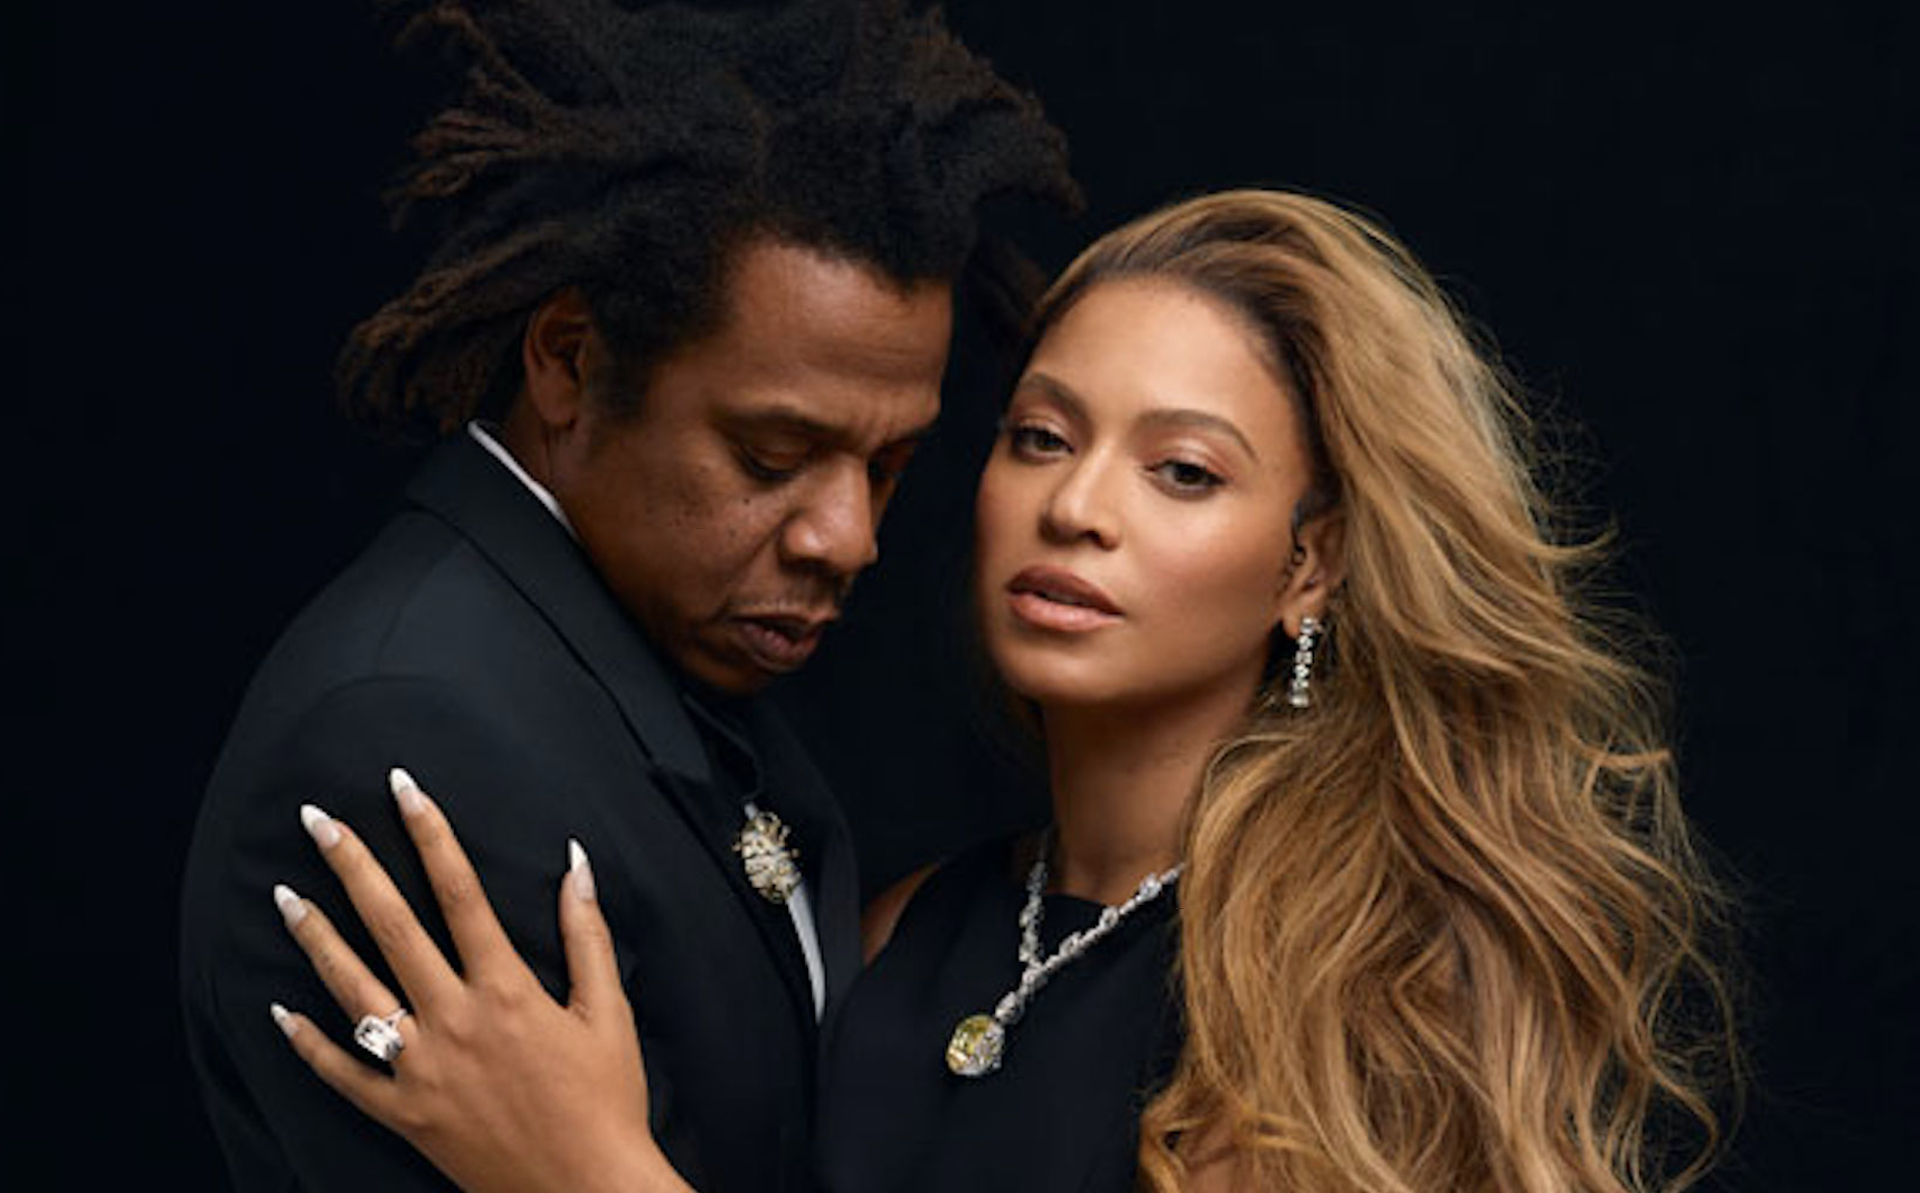 Beyonce and Jay-Z Tie for All-Time Most Grammy Nominations